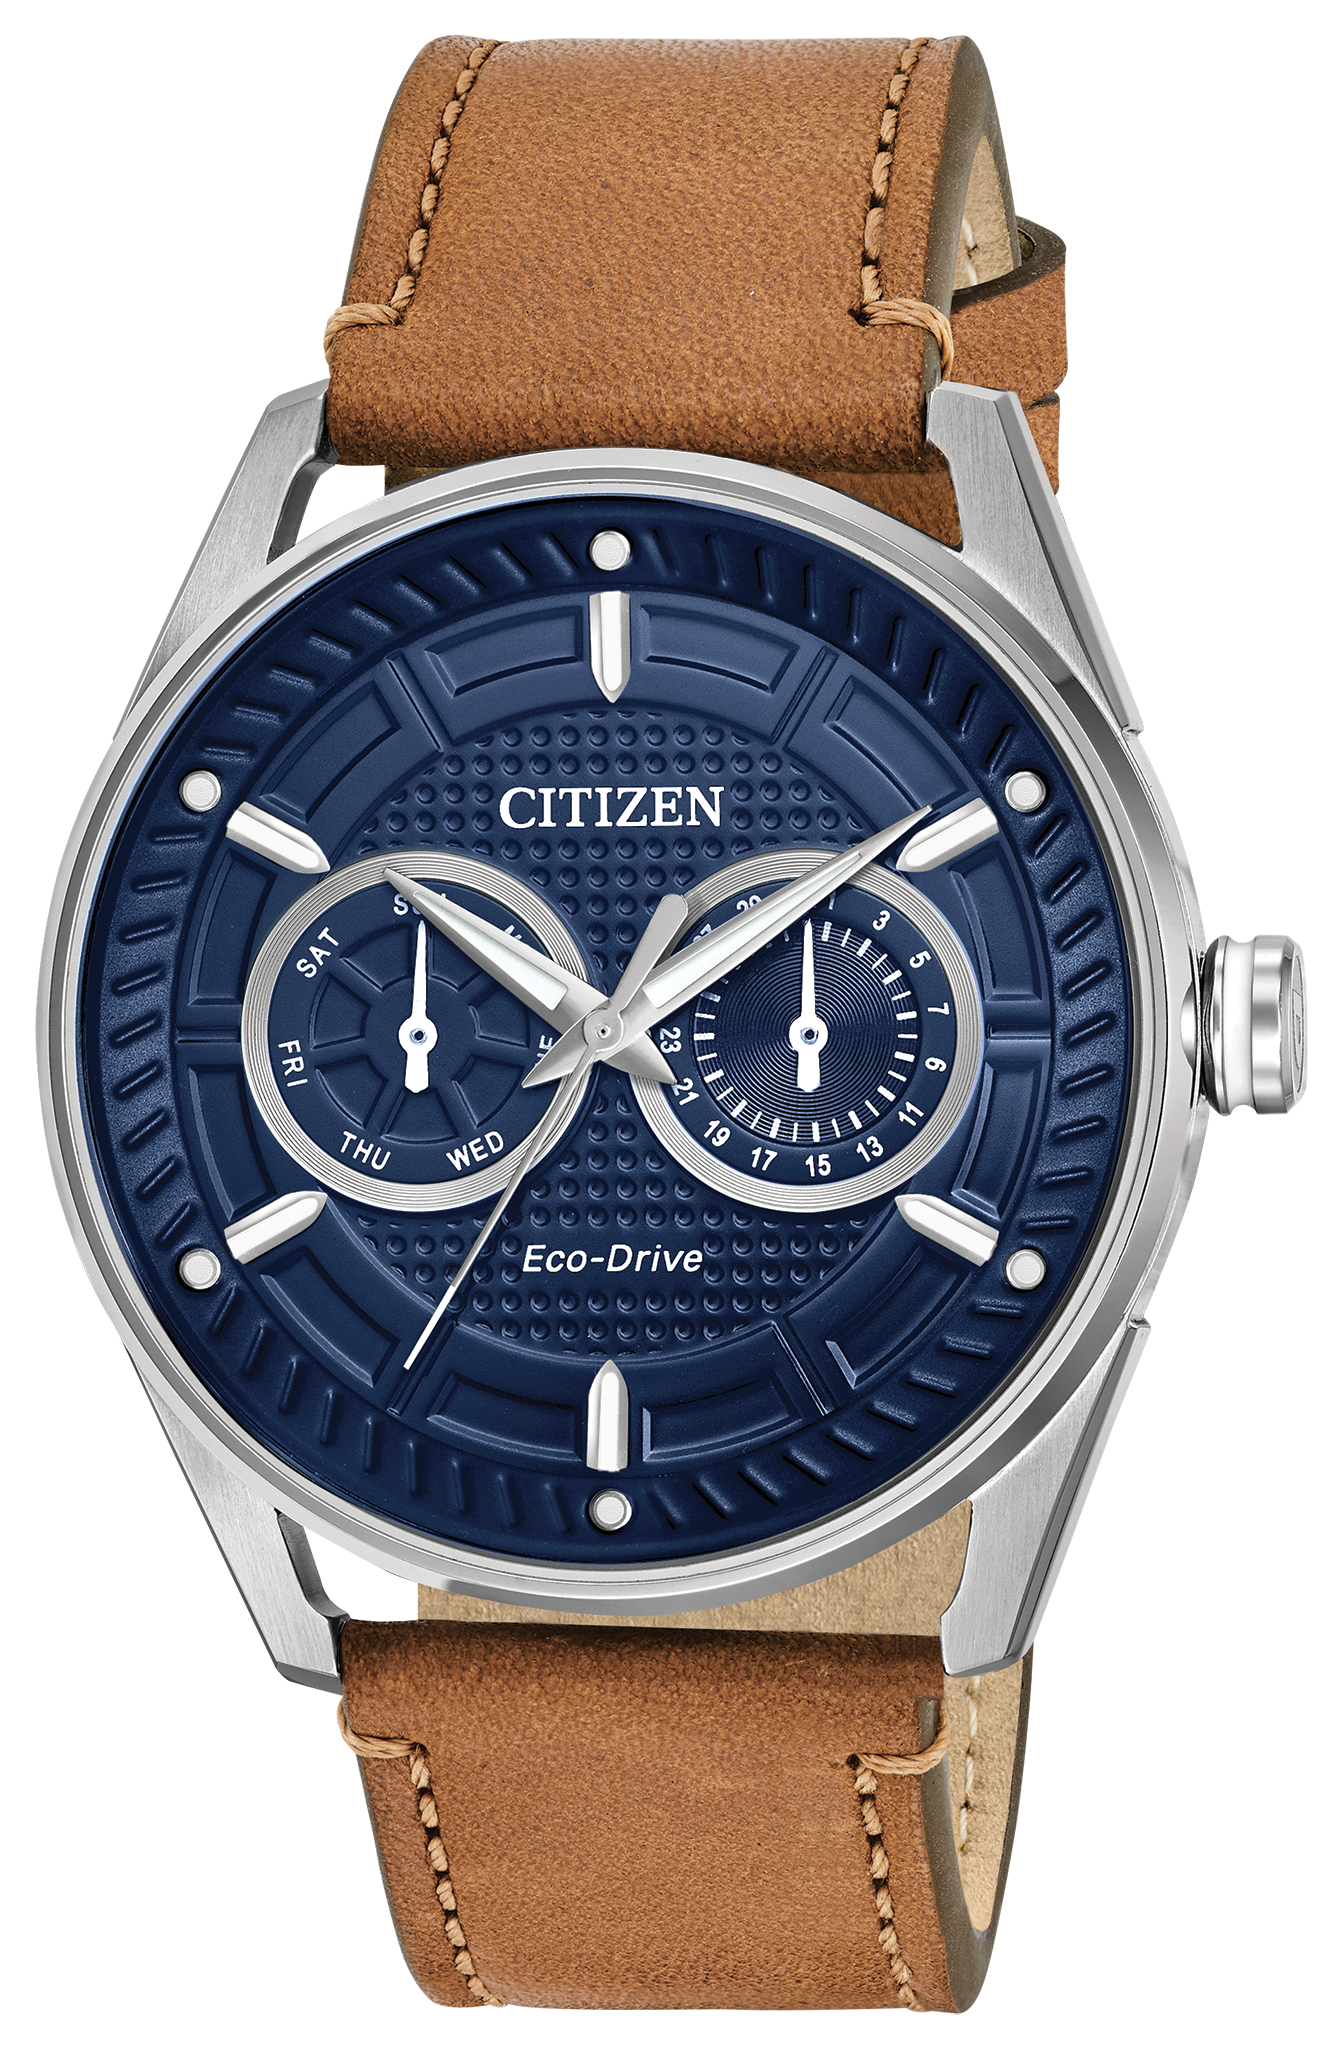 Eco-Drive with Annual Accuracy of ±1 Second｜The CITIZEN -Official Site  [CITIZEN]